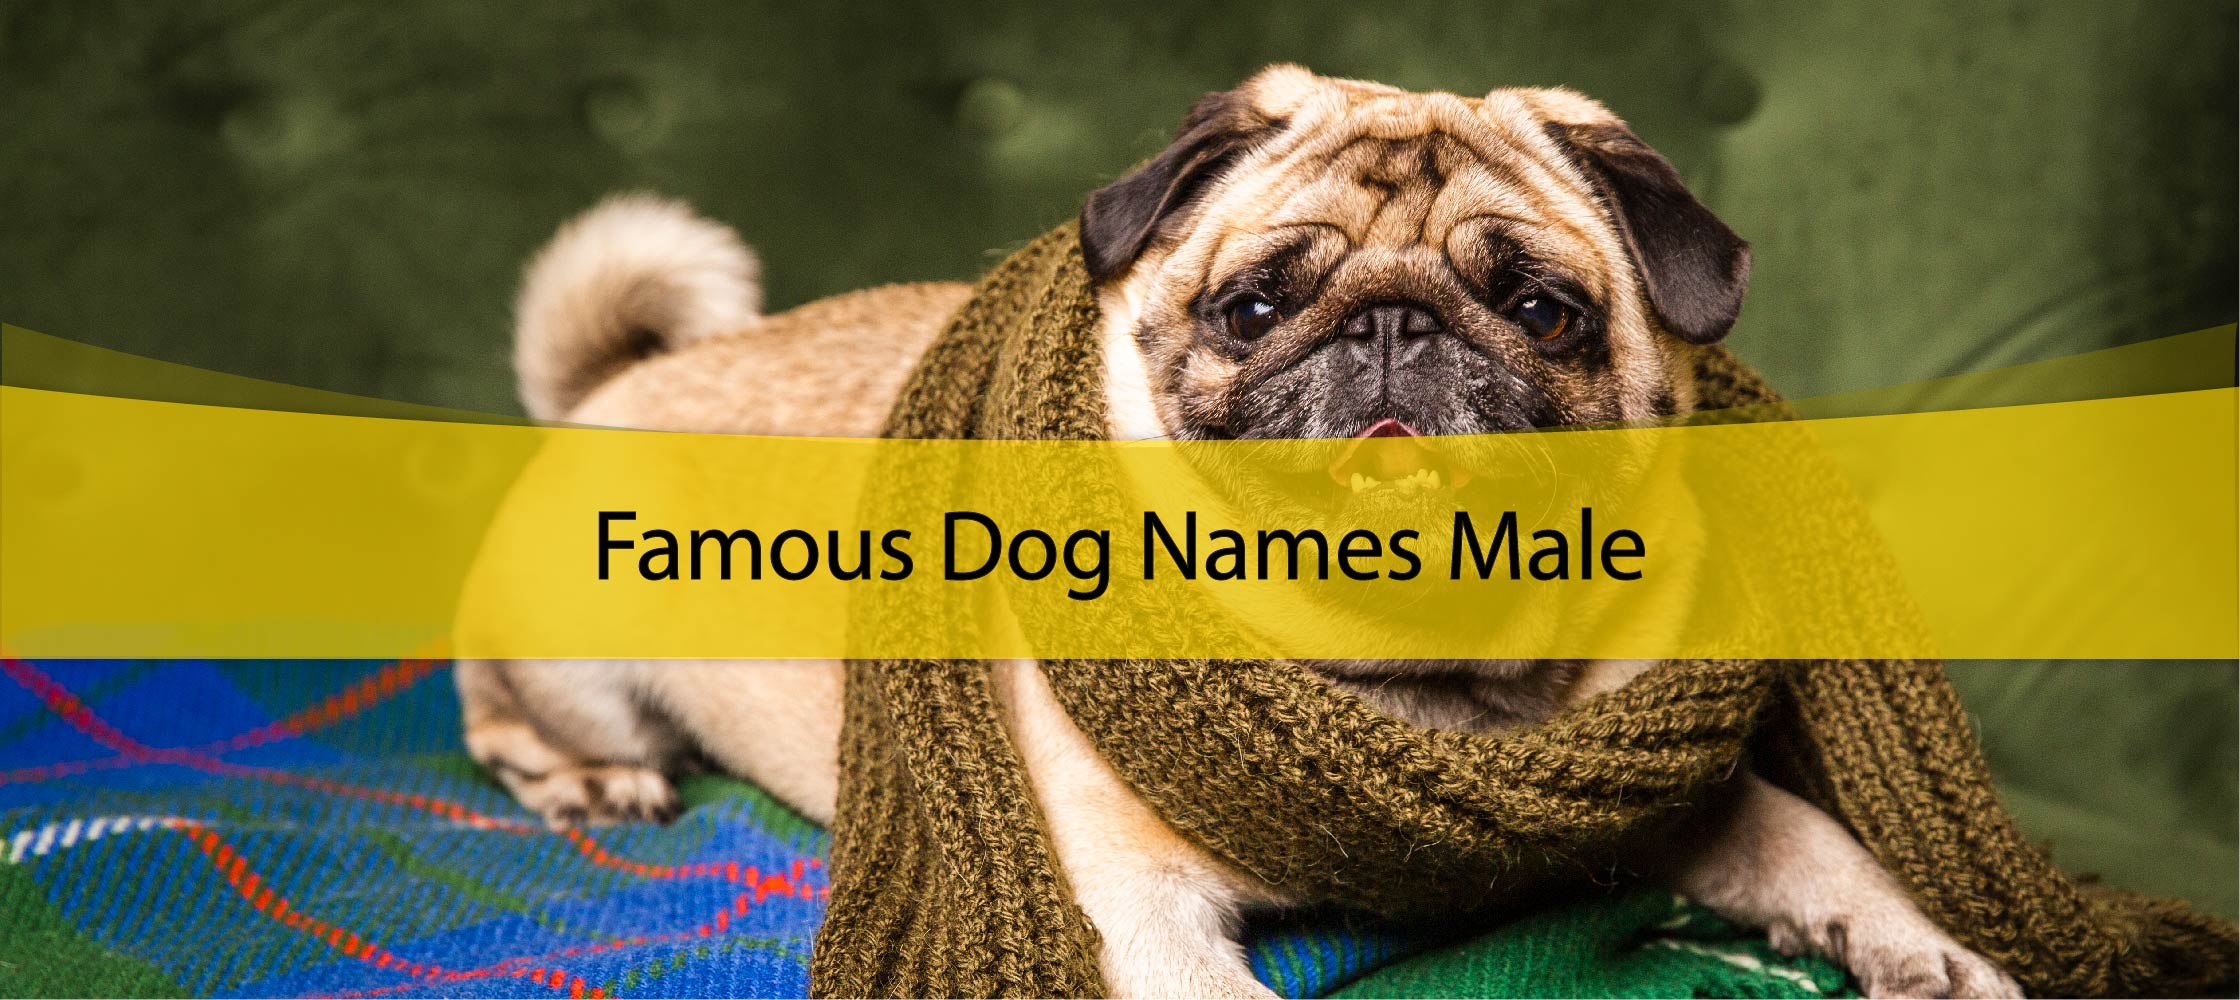 Famous Dog Names Male